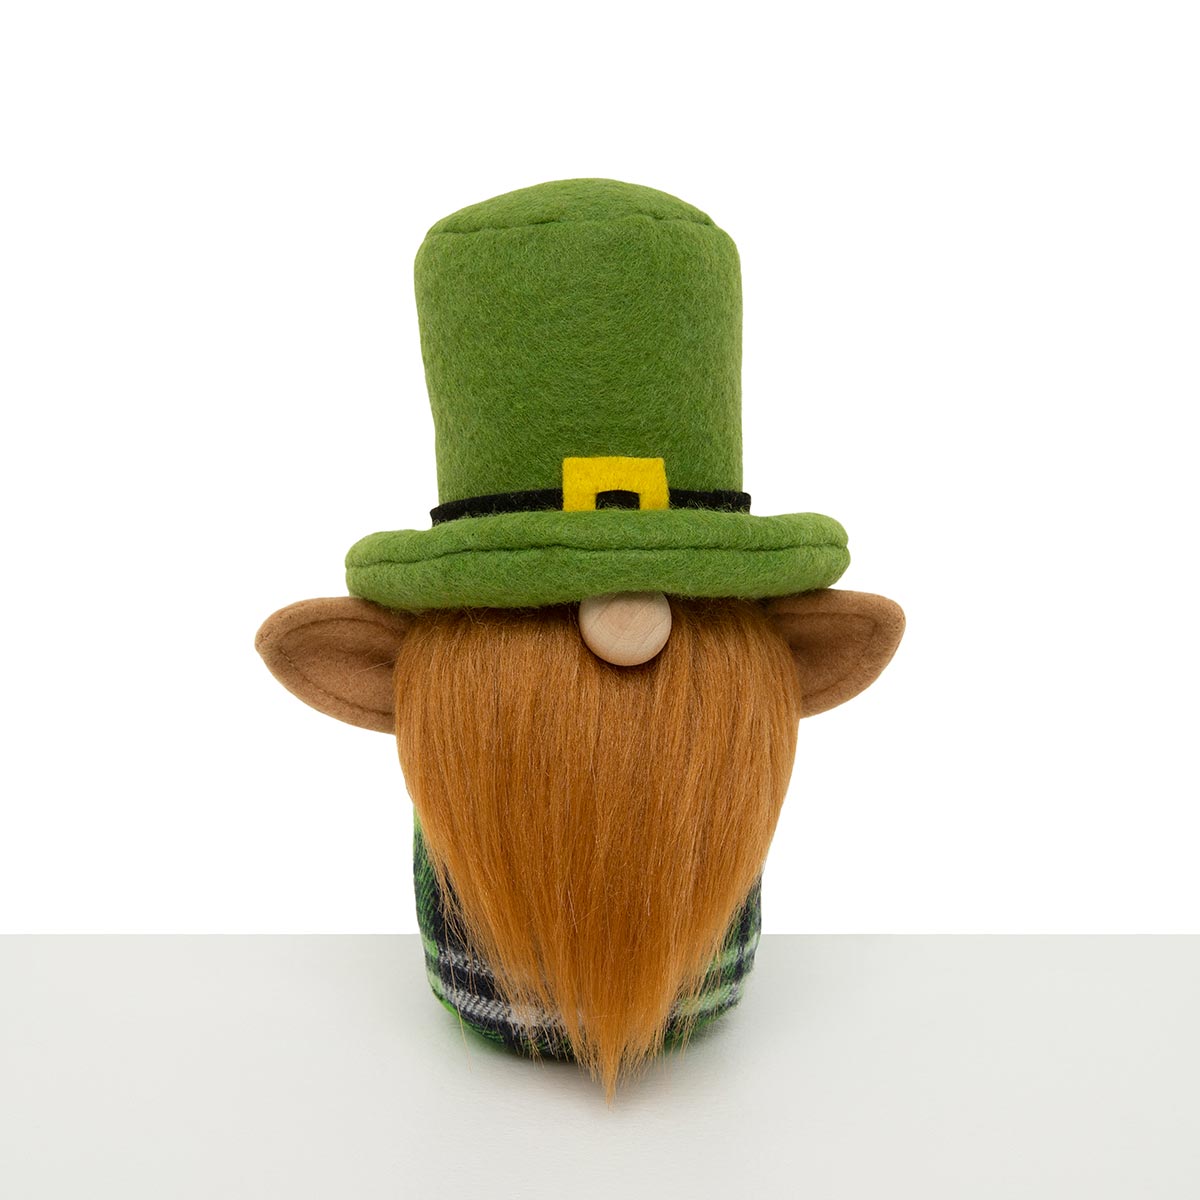 LEPRECHAUN GNOME - GREEN WITH BUCKLE HAT & WOOD NOSE